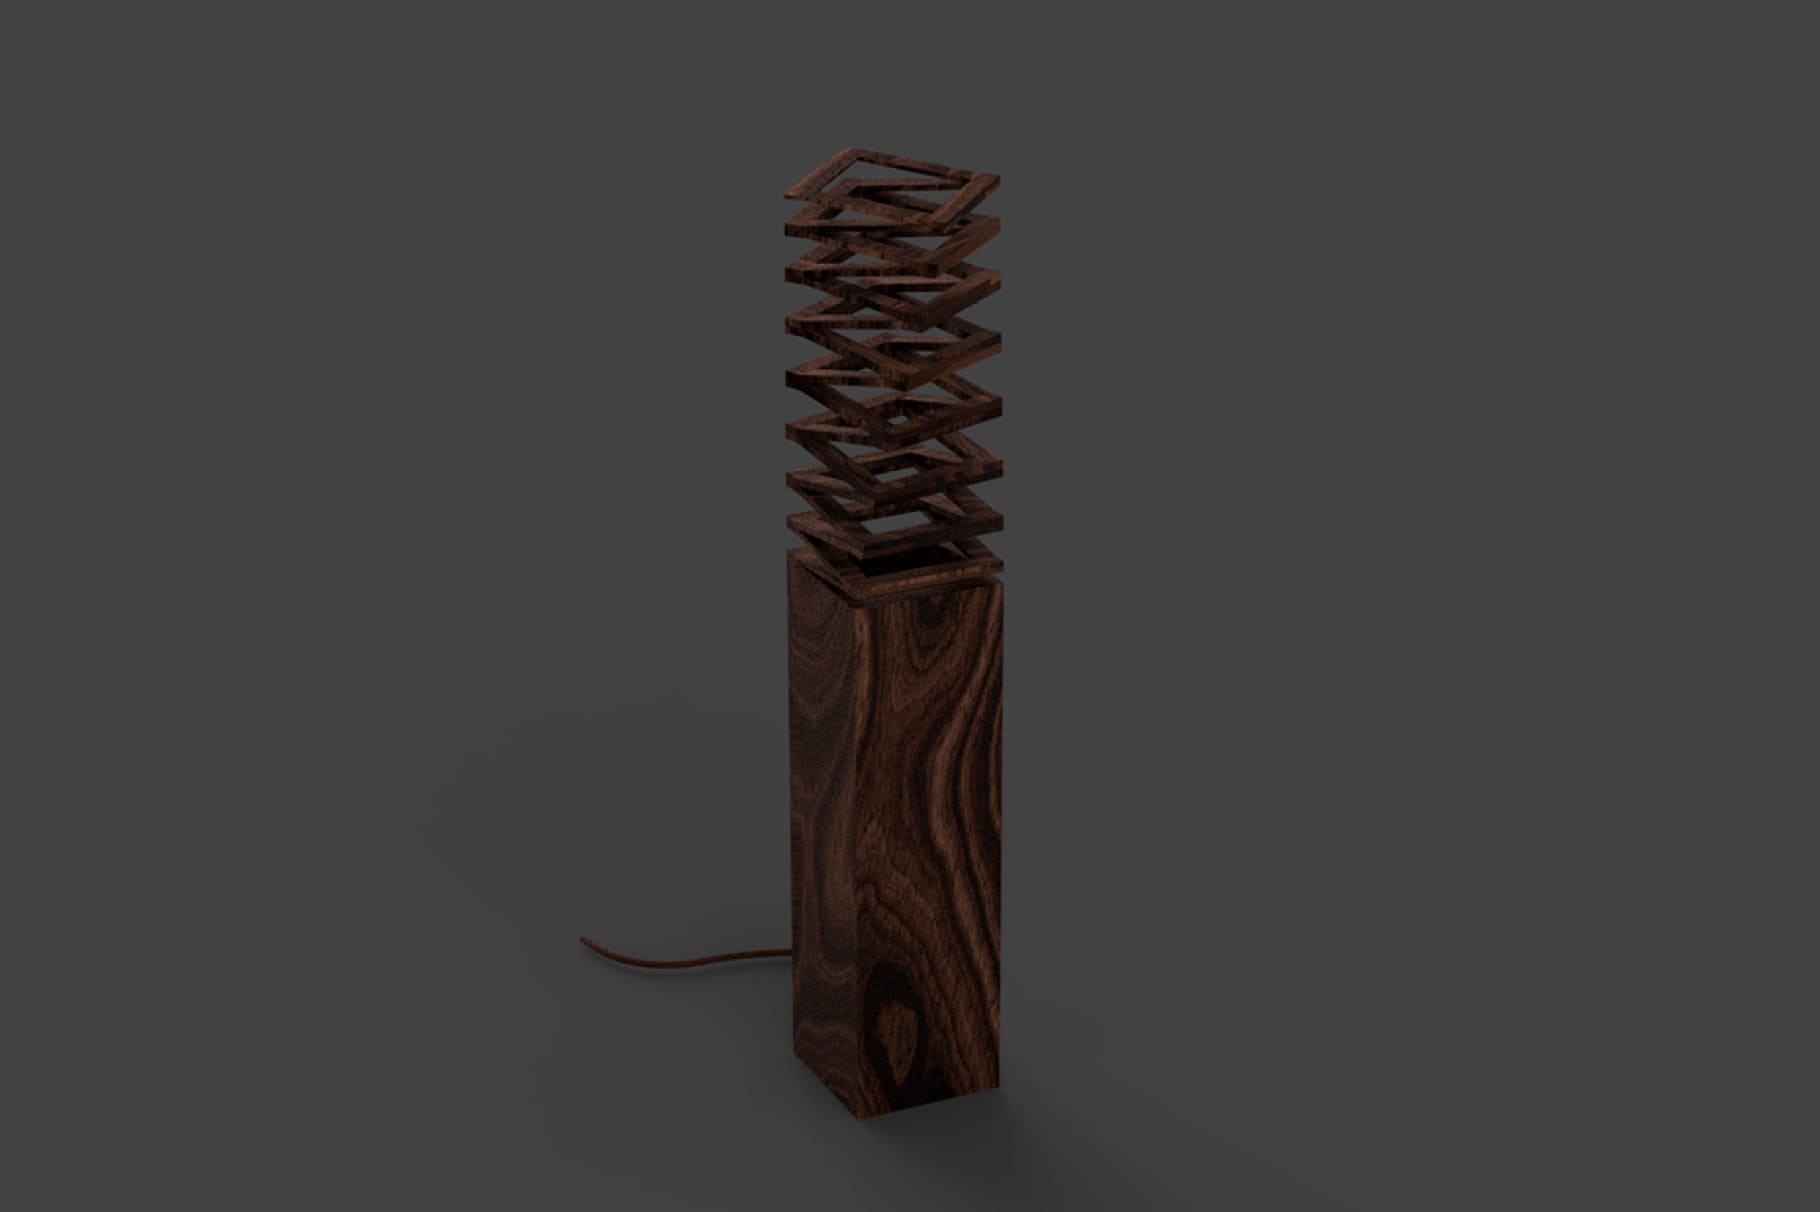 A vertical stylish spiral-shaped wooden lamp.